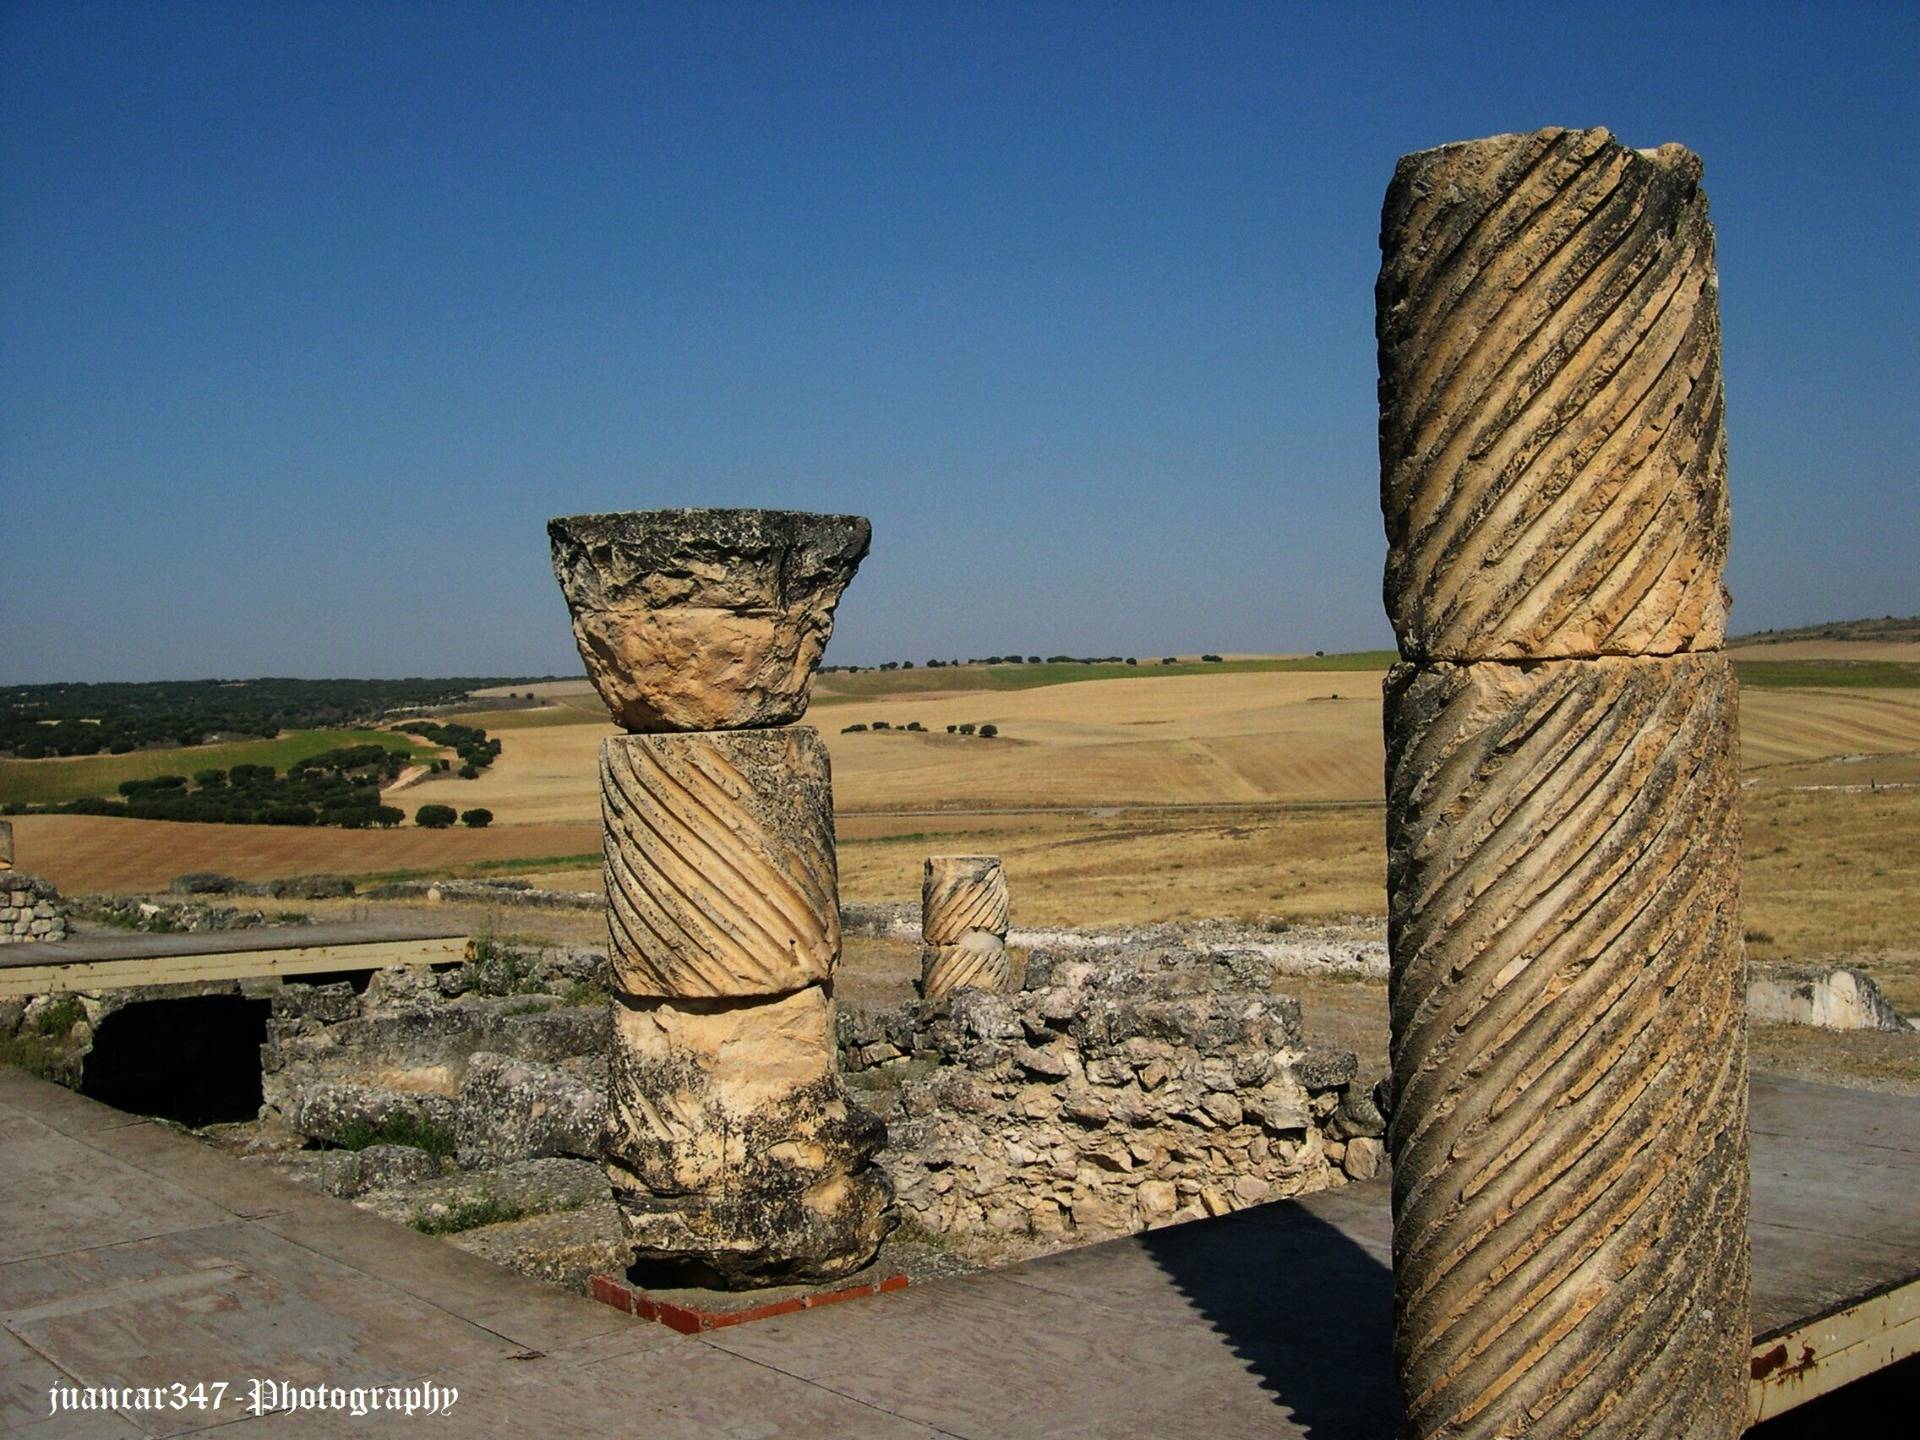 Another panoramic view of the ancient columns of the Forum